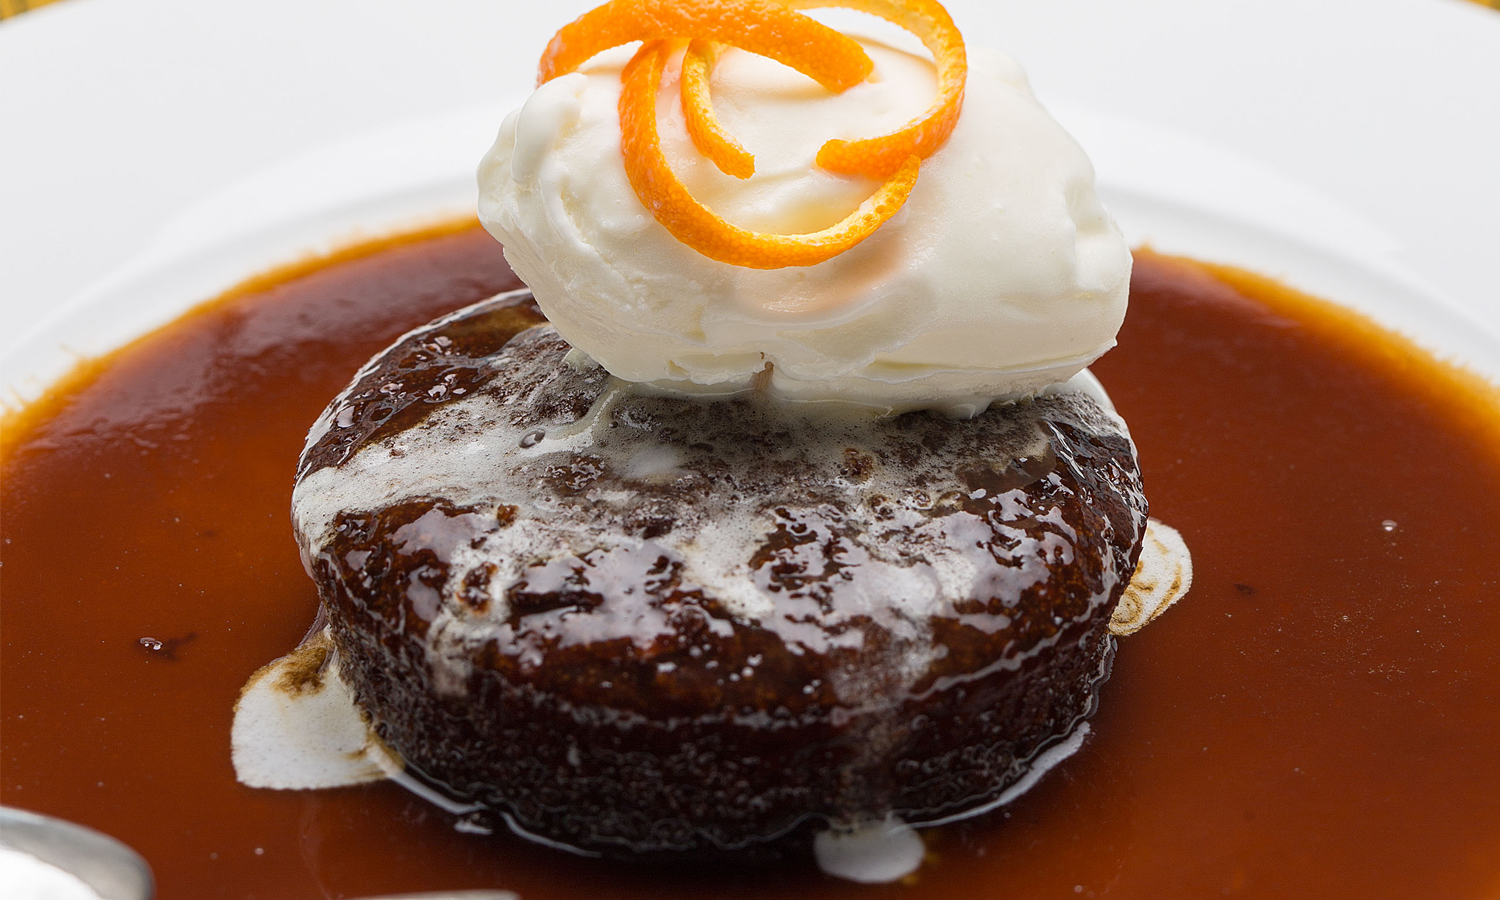 Cartmel Sticky Toffee Pudding